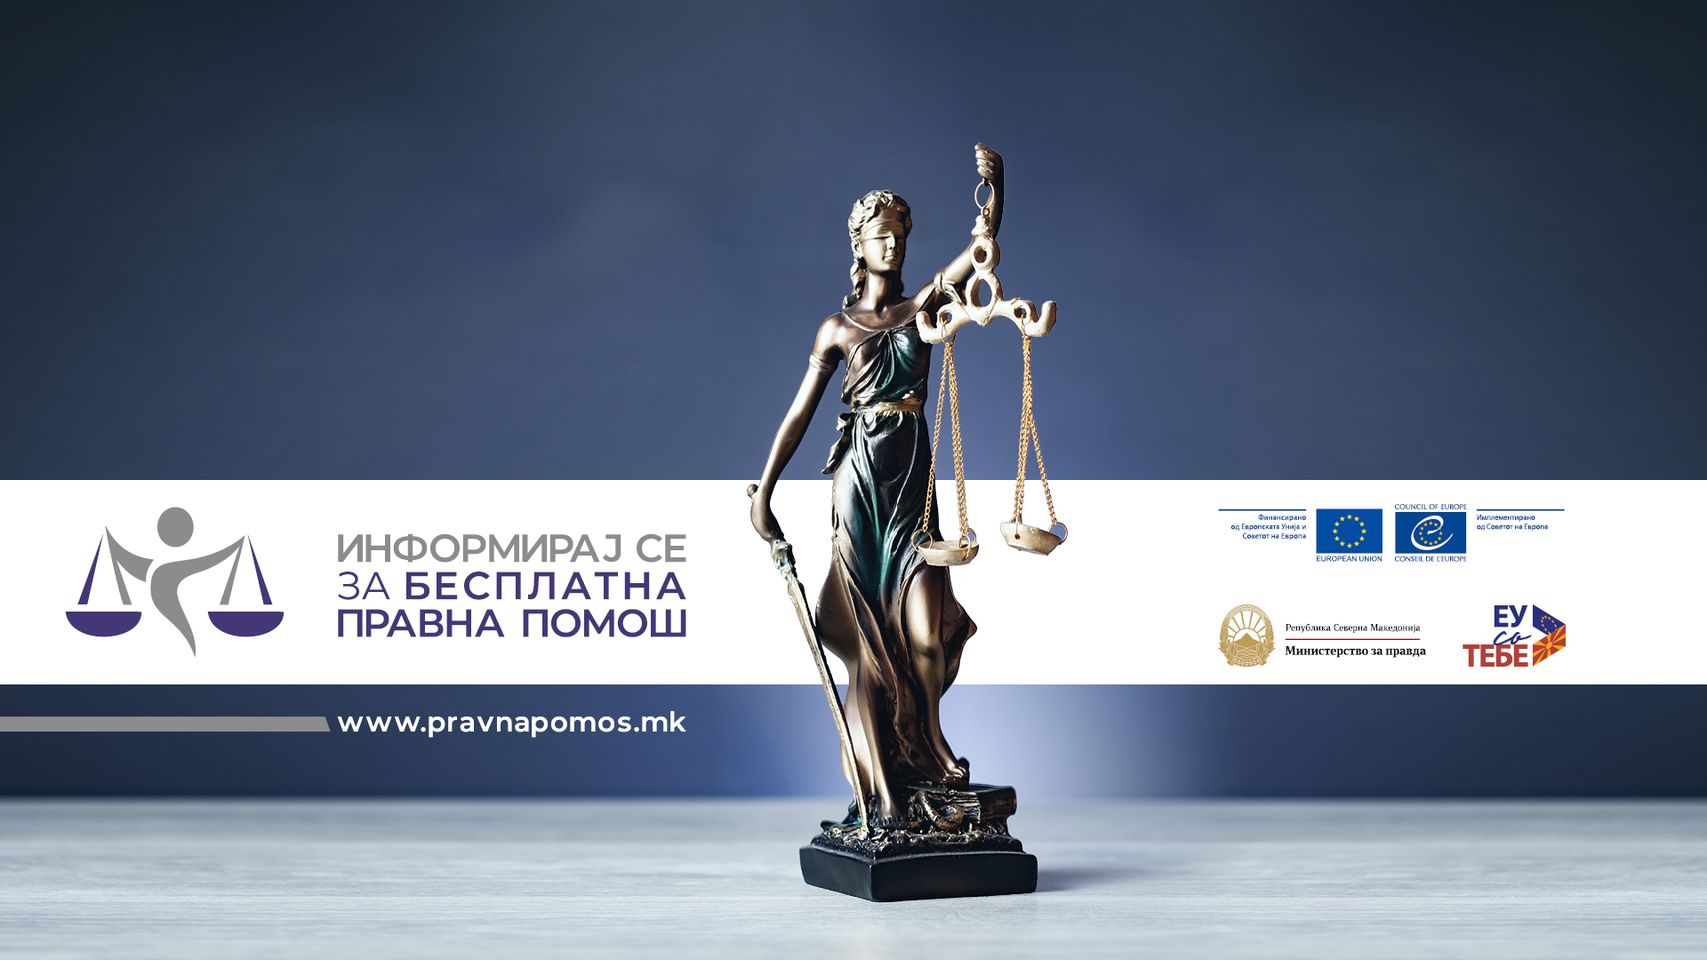 Citizens of North Macedonia informed on Free Legal Aid services and expanding its use